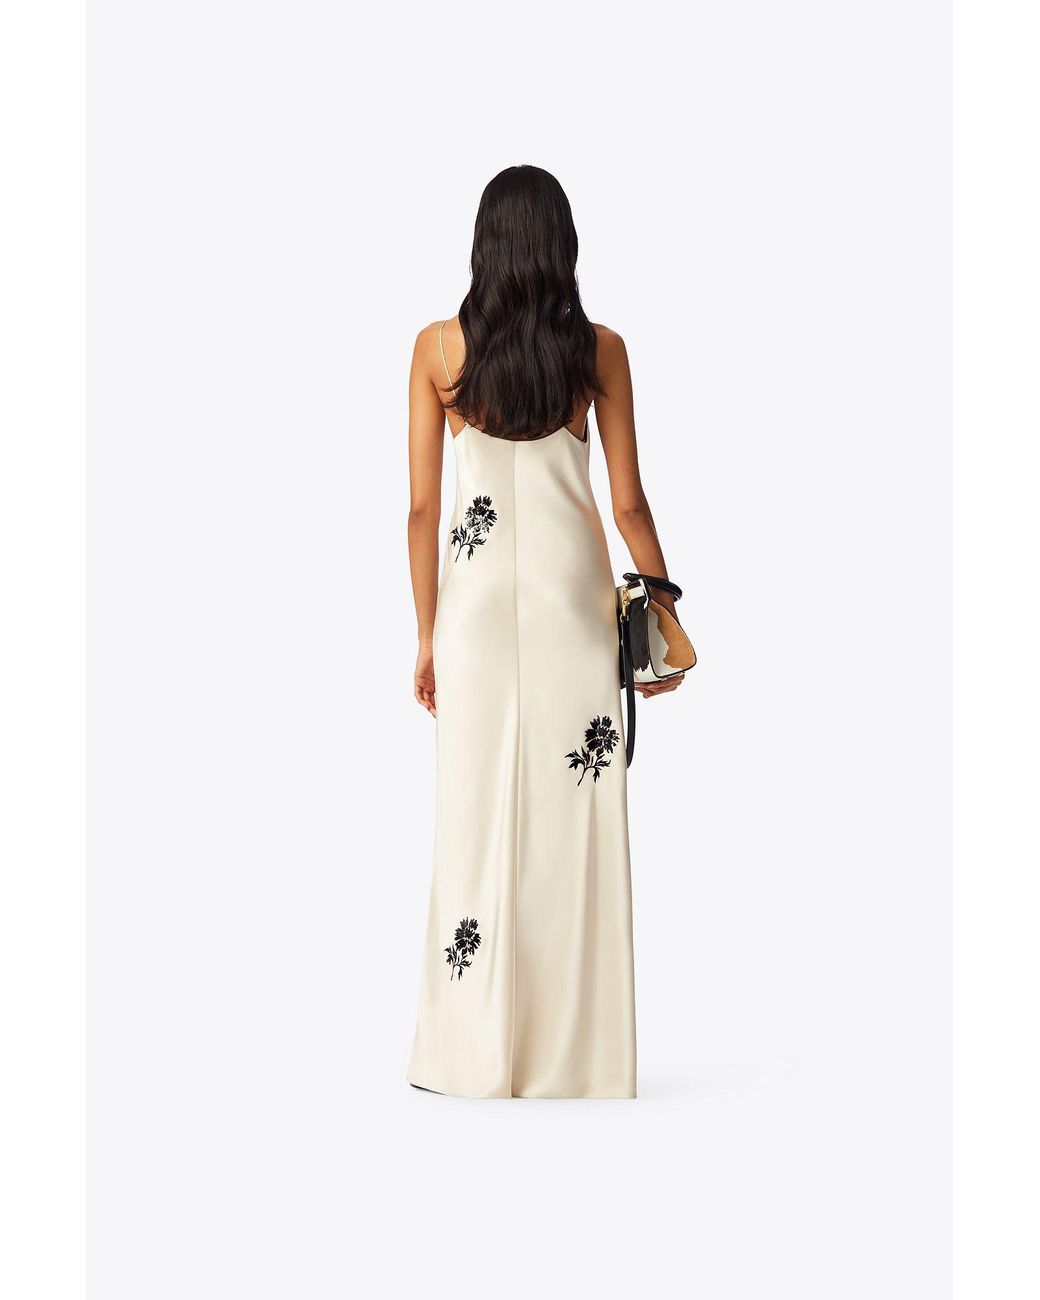 Tory Burch Embroidered Flower Dress in Natural | Lyst